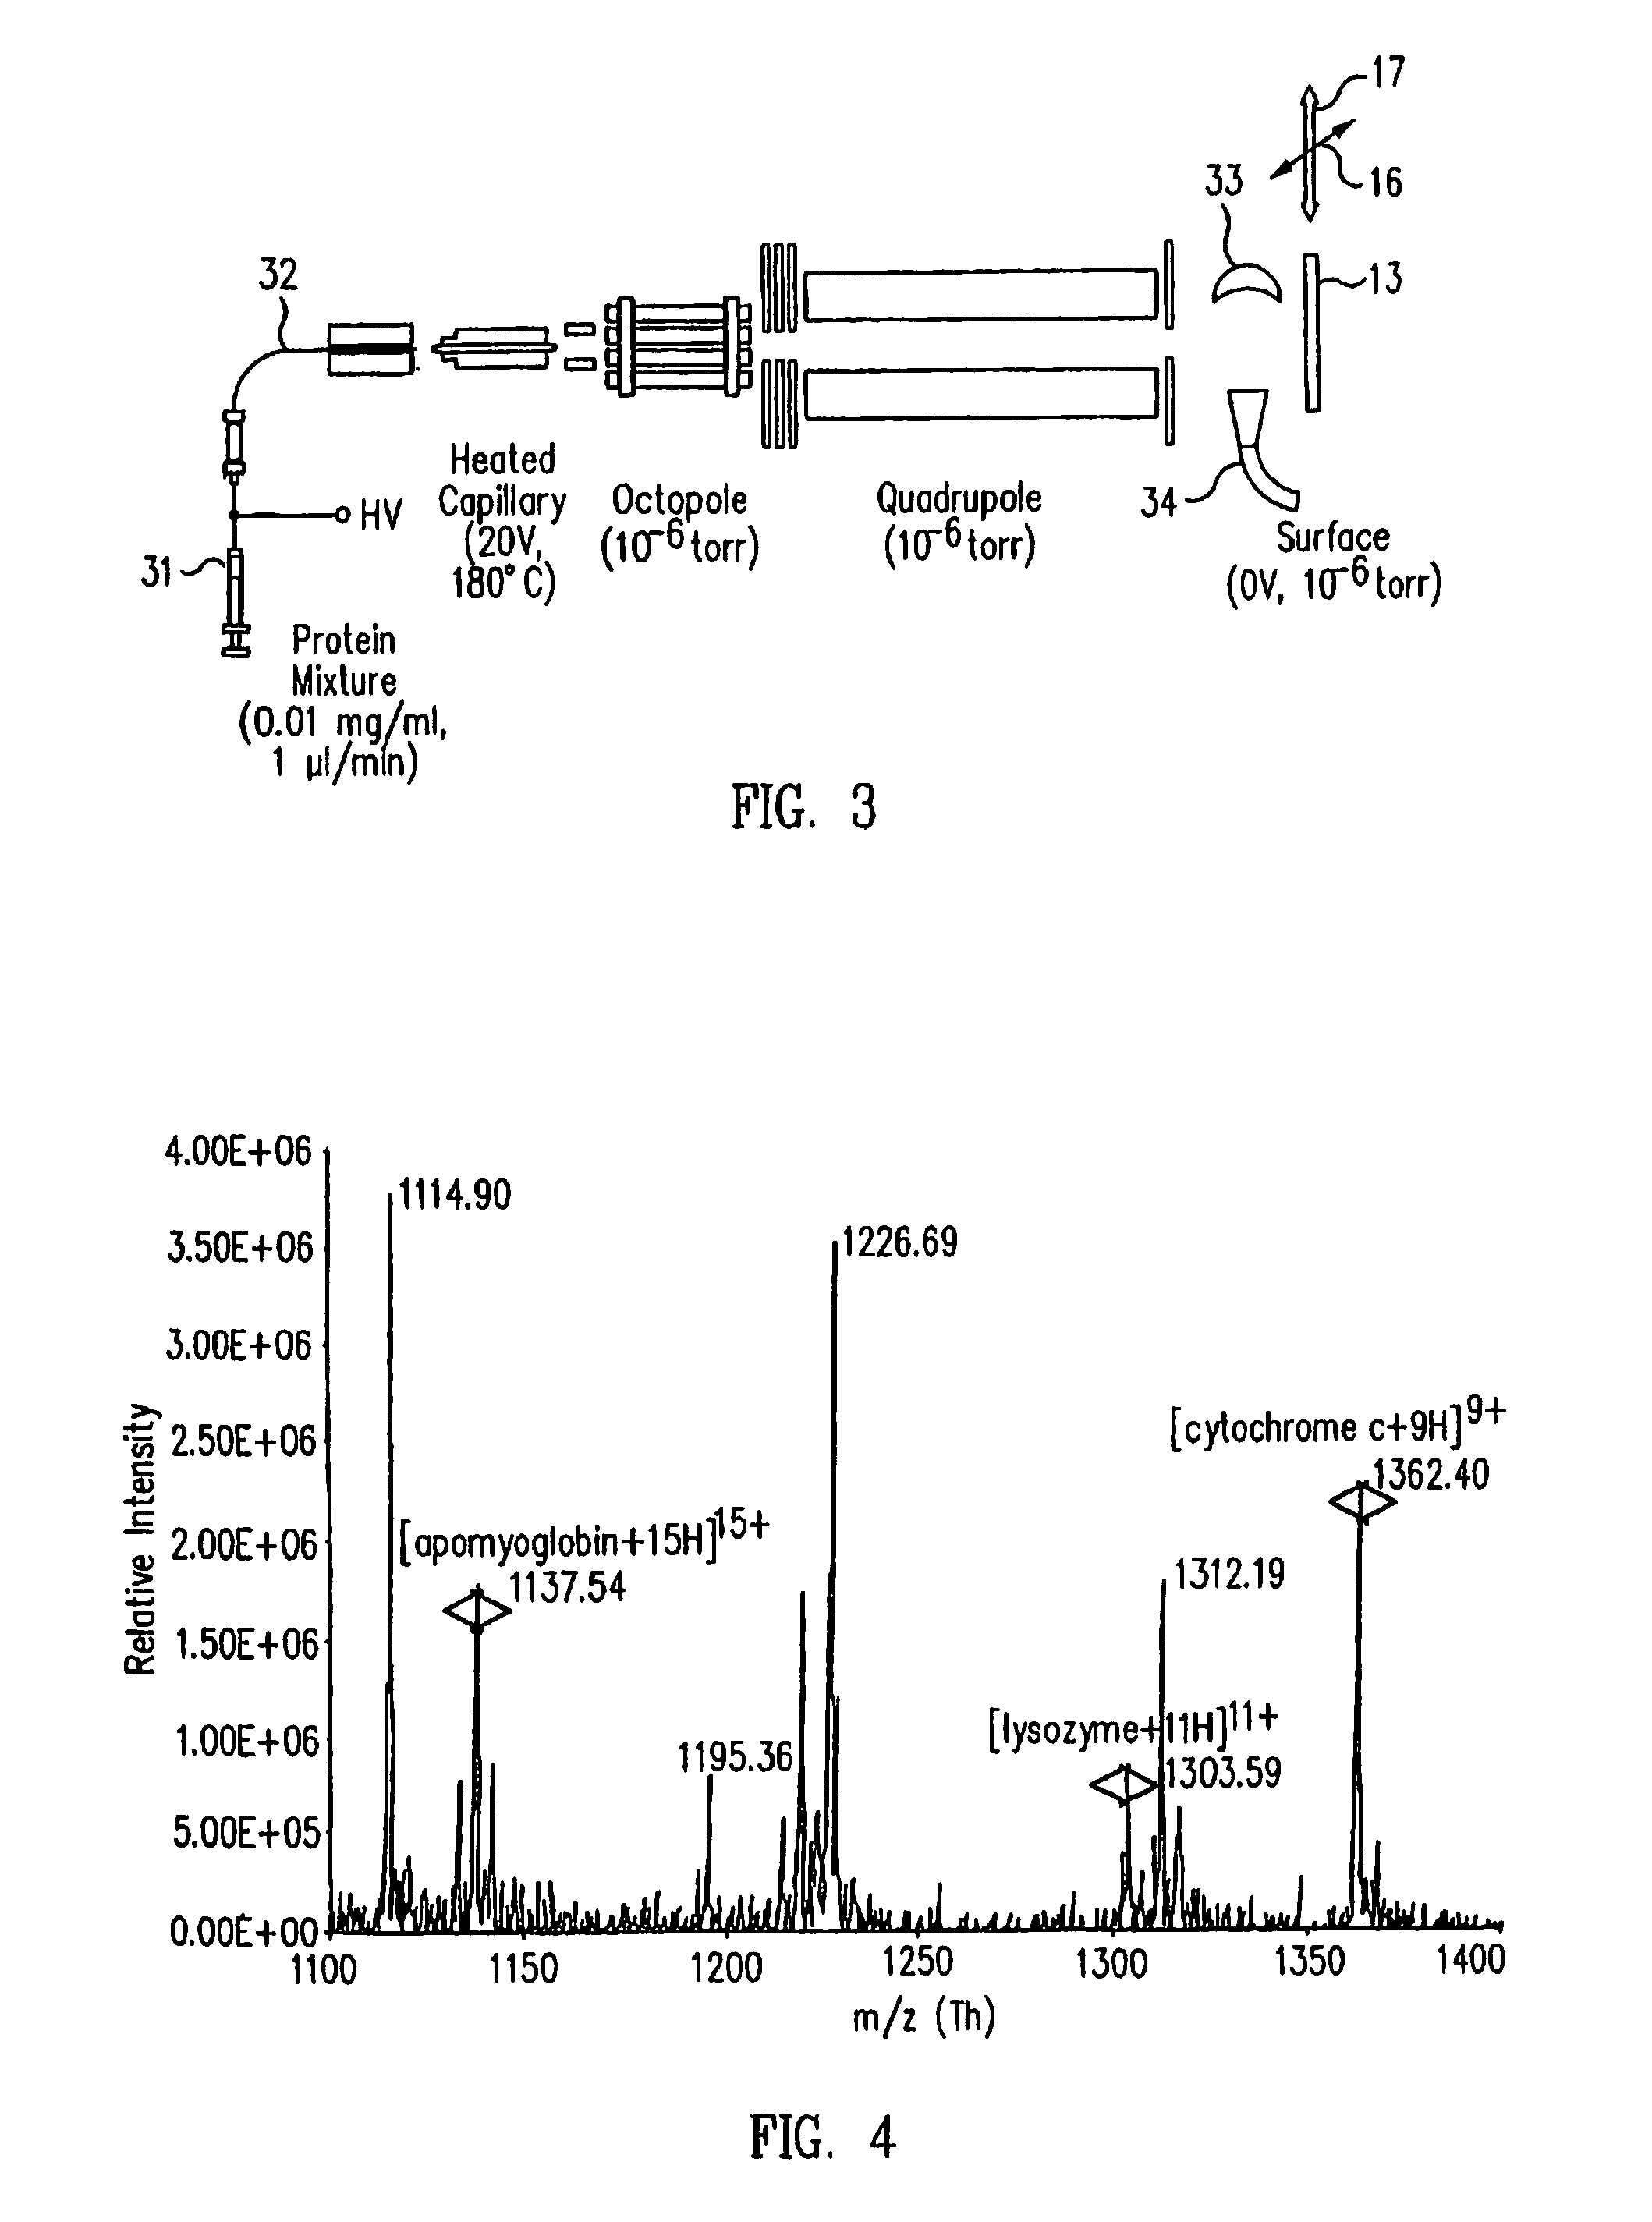 System and method for preparative mass spectrometry